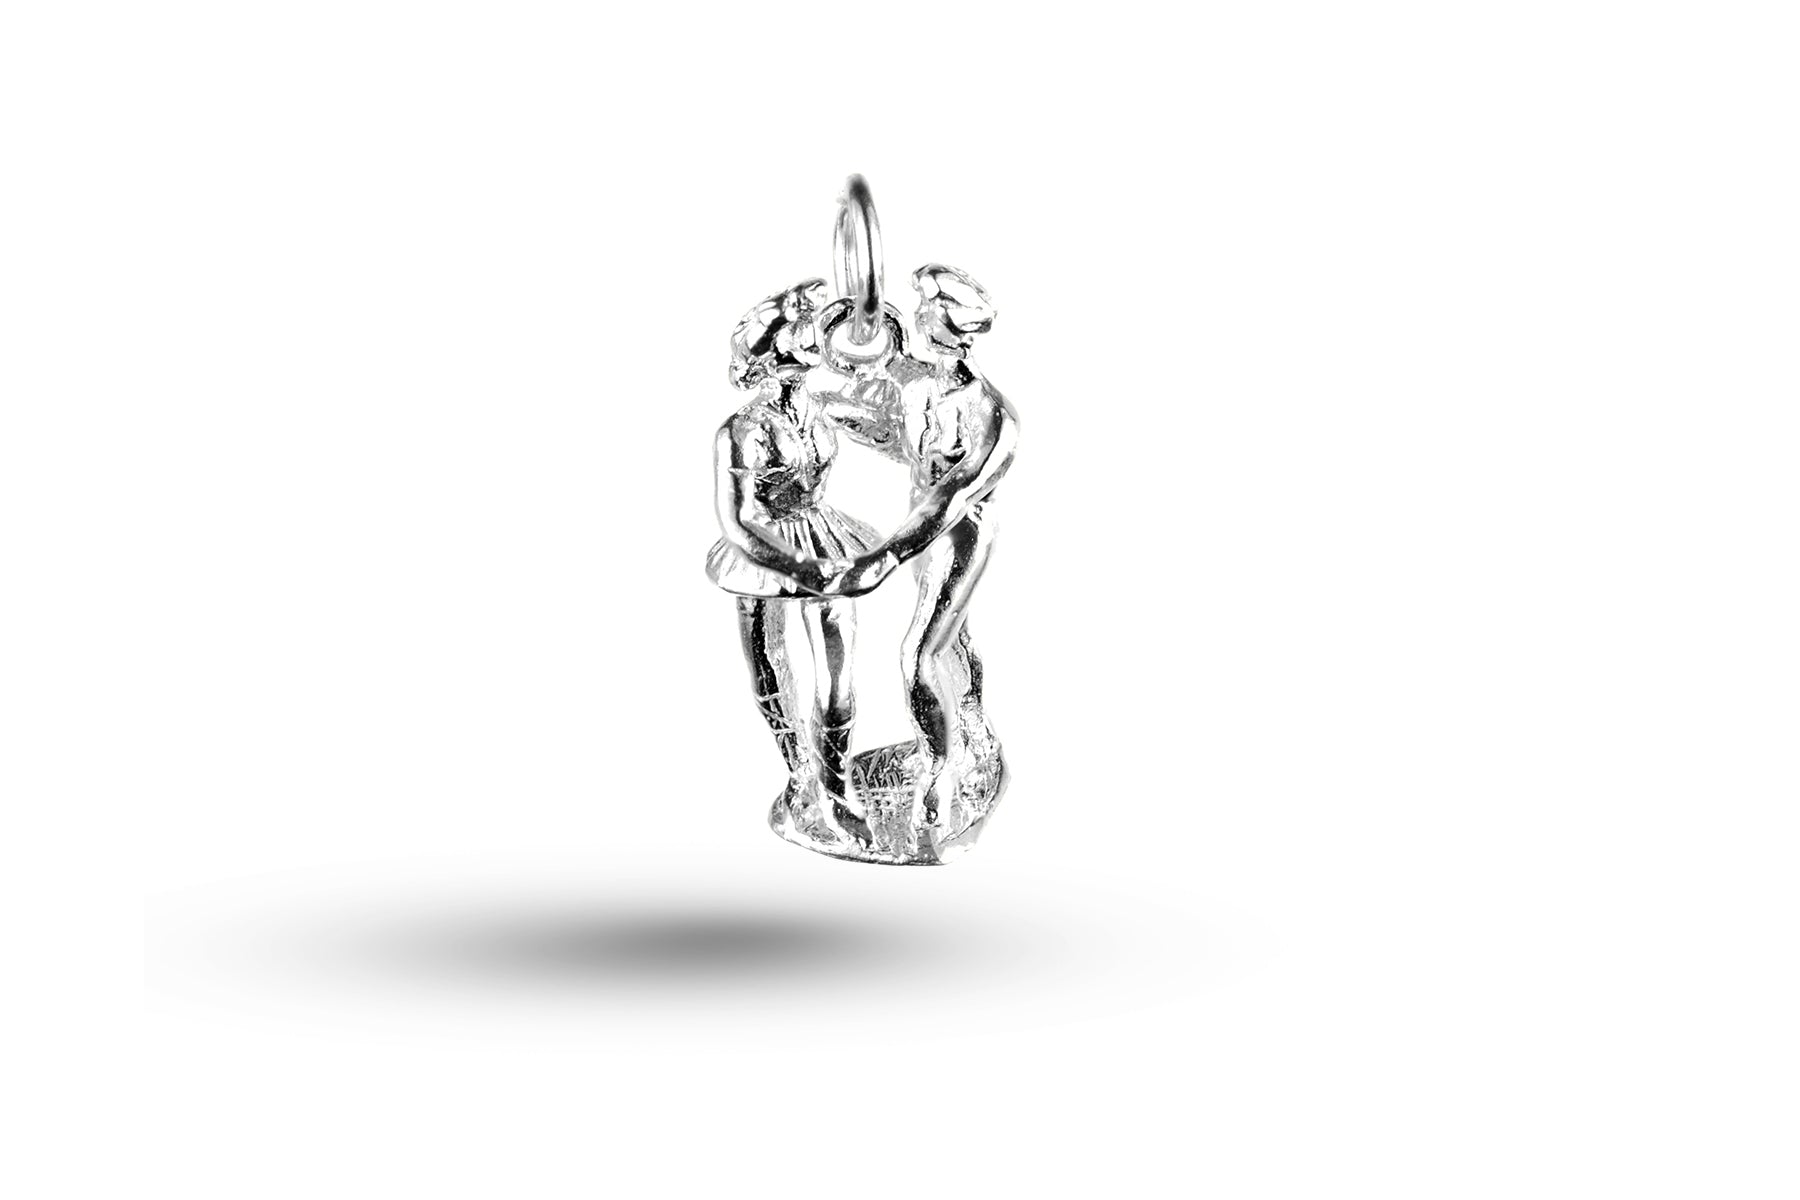 White gold Rock and Roll Dancers charm.